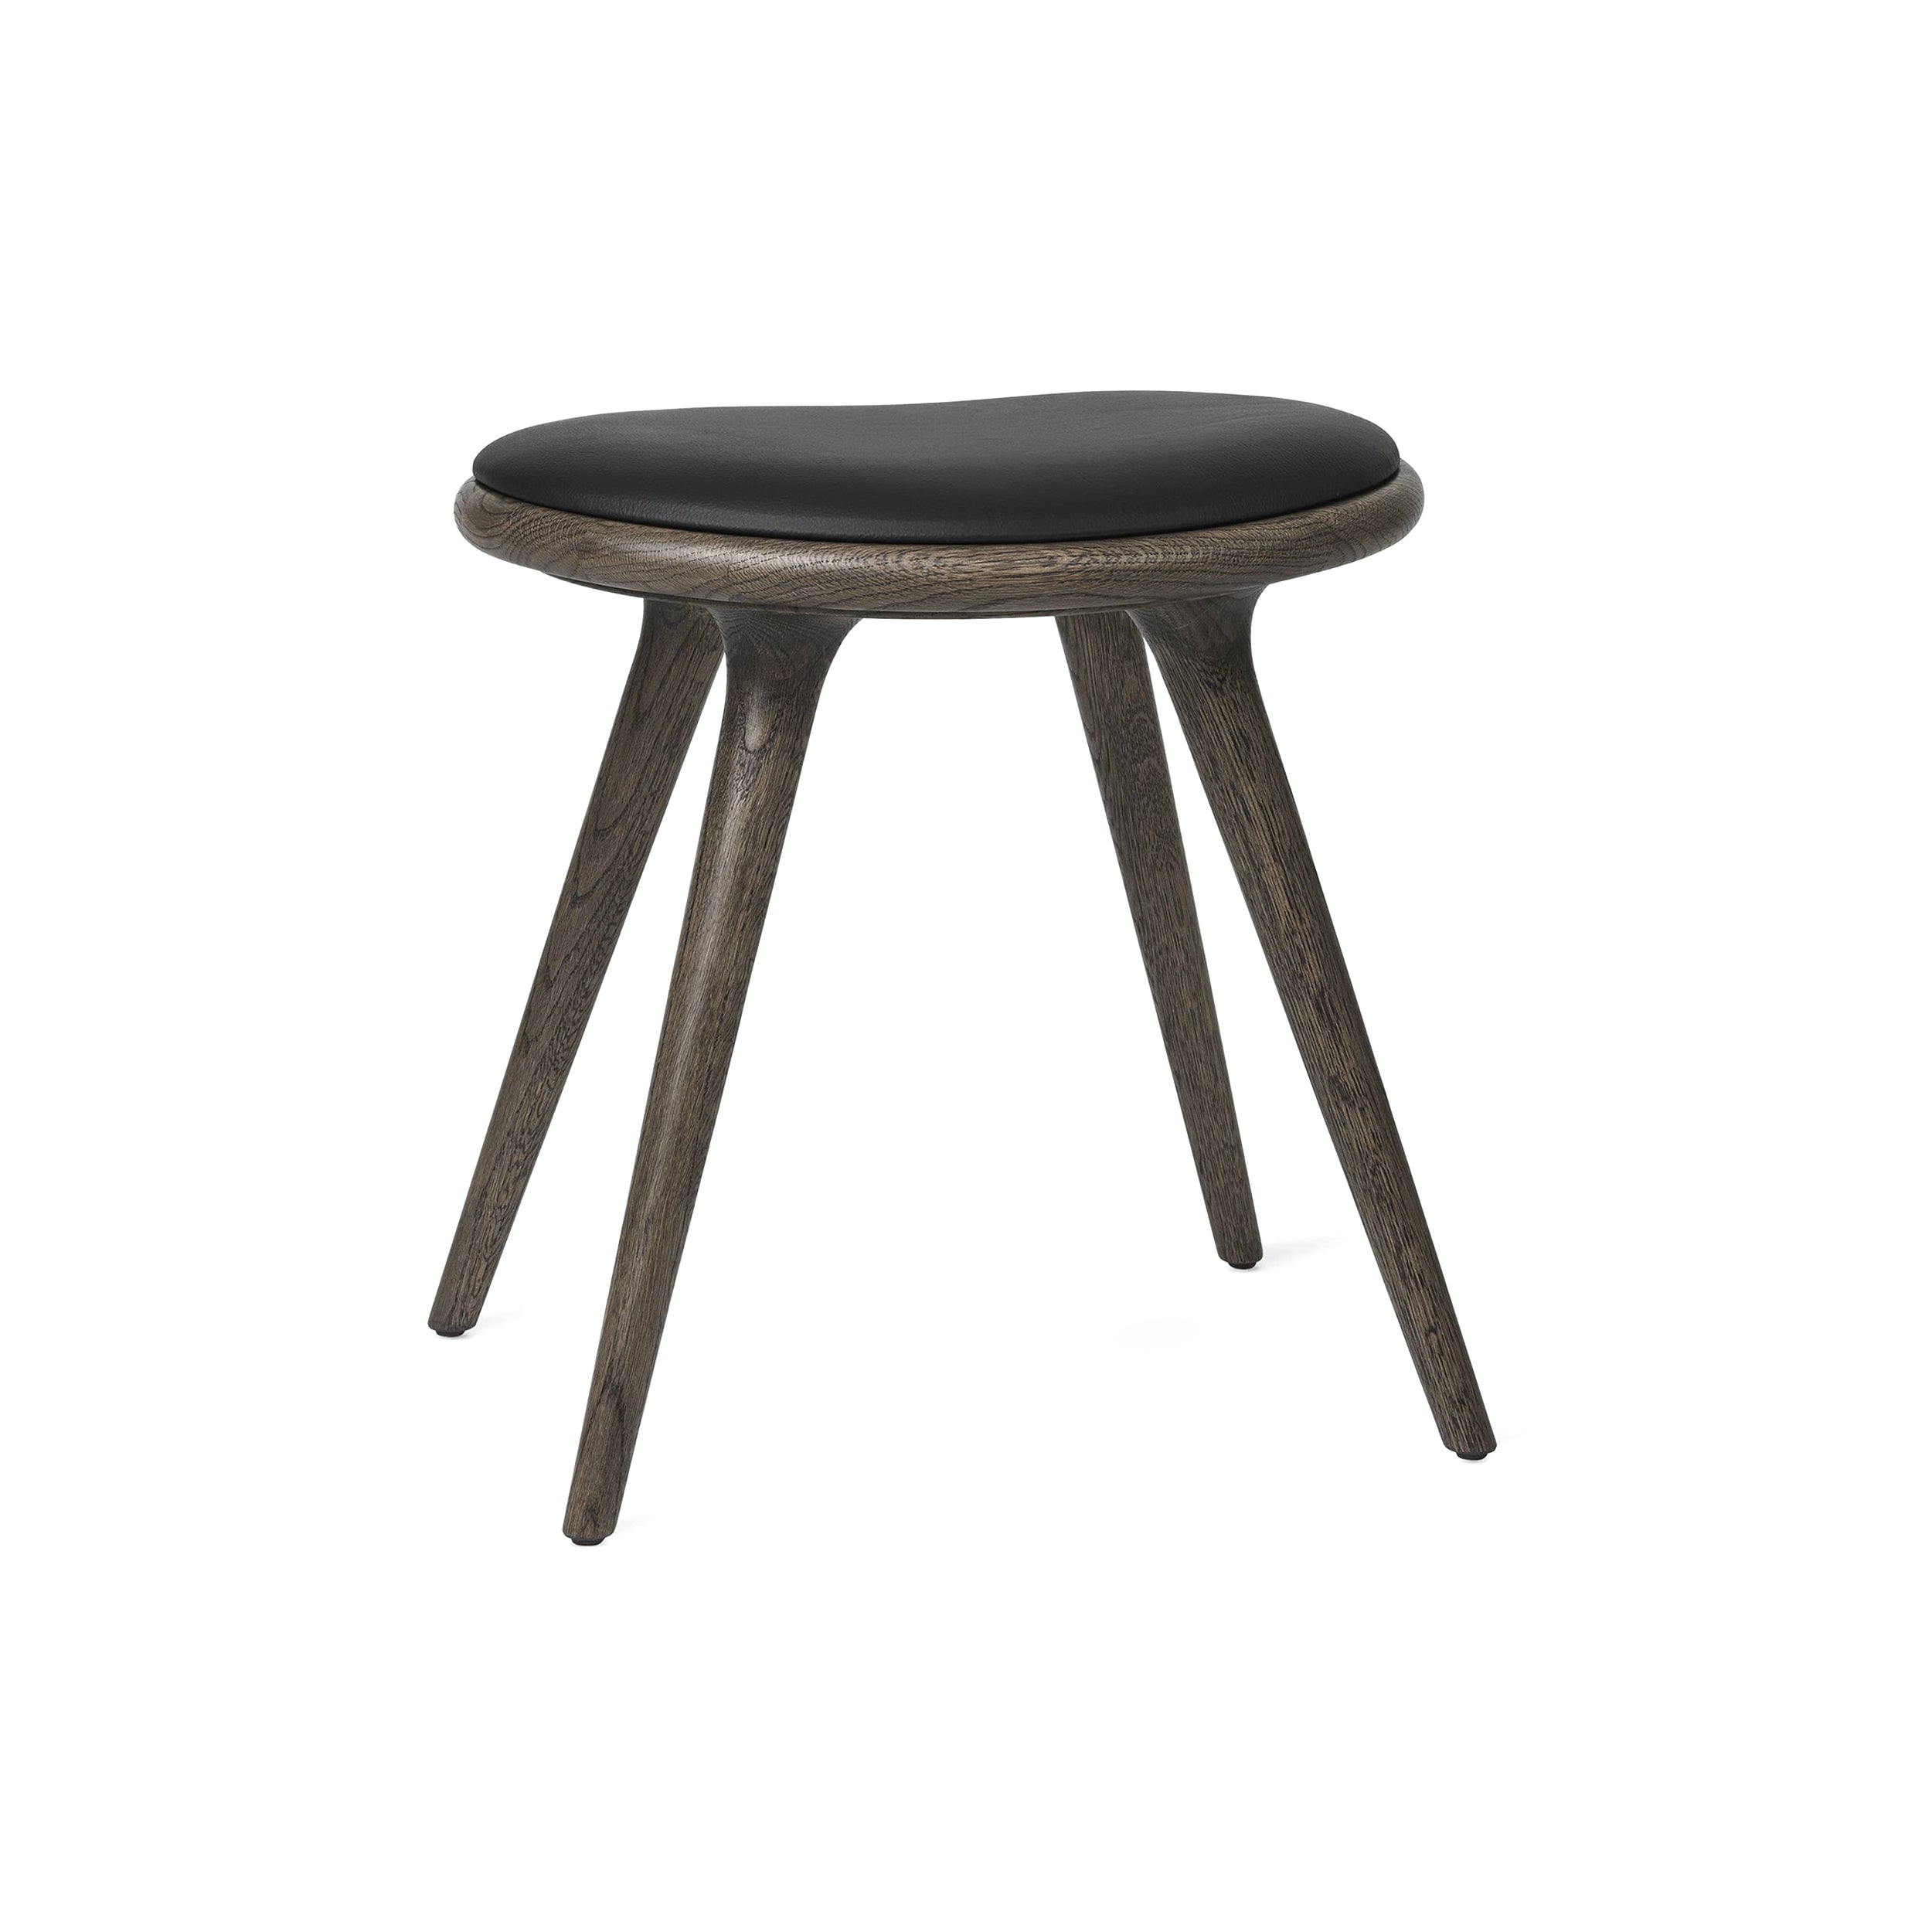 Low Stool: Grey Stained Oak + Black Leather